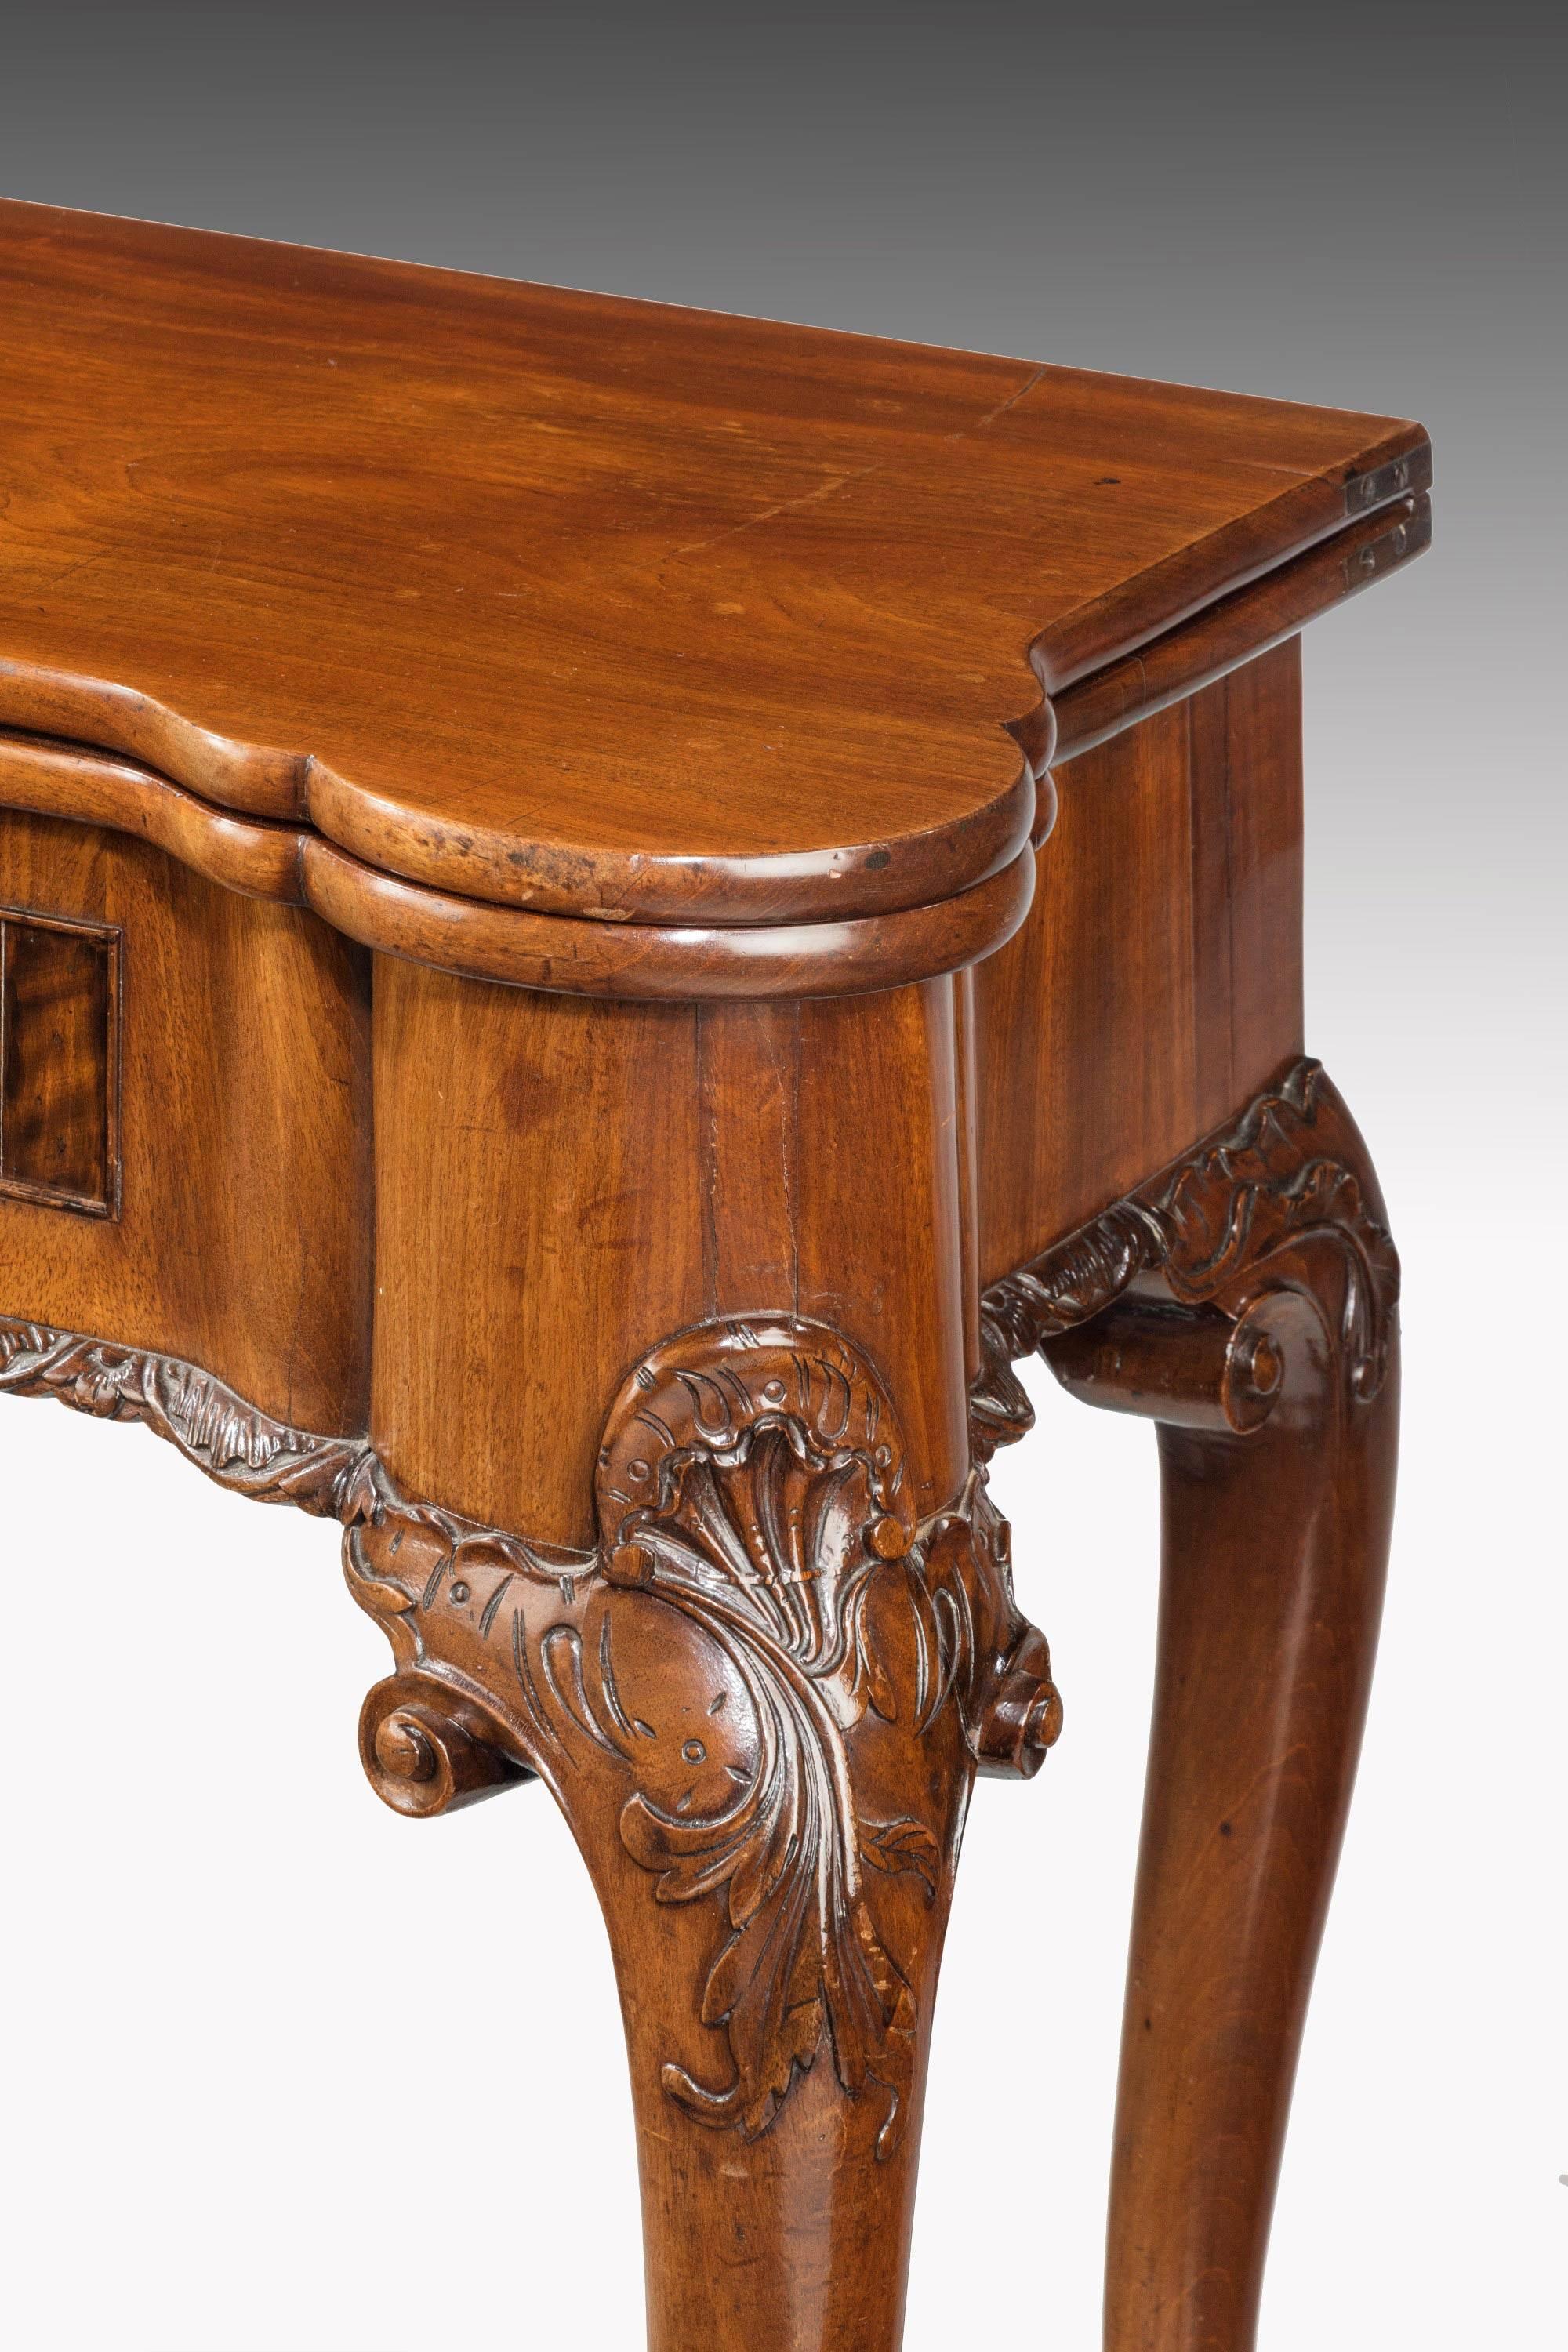 English Mid-18th Century Card Table the Lappet Corners with Double Mouldings